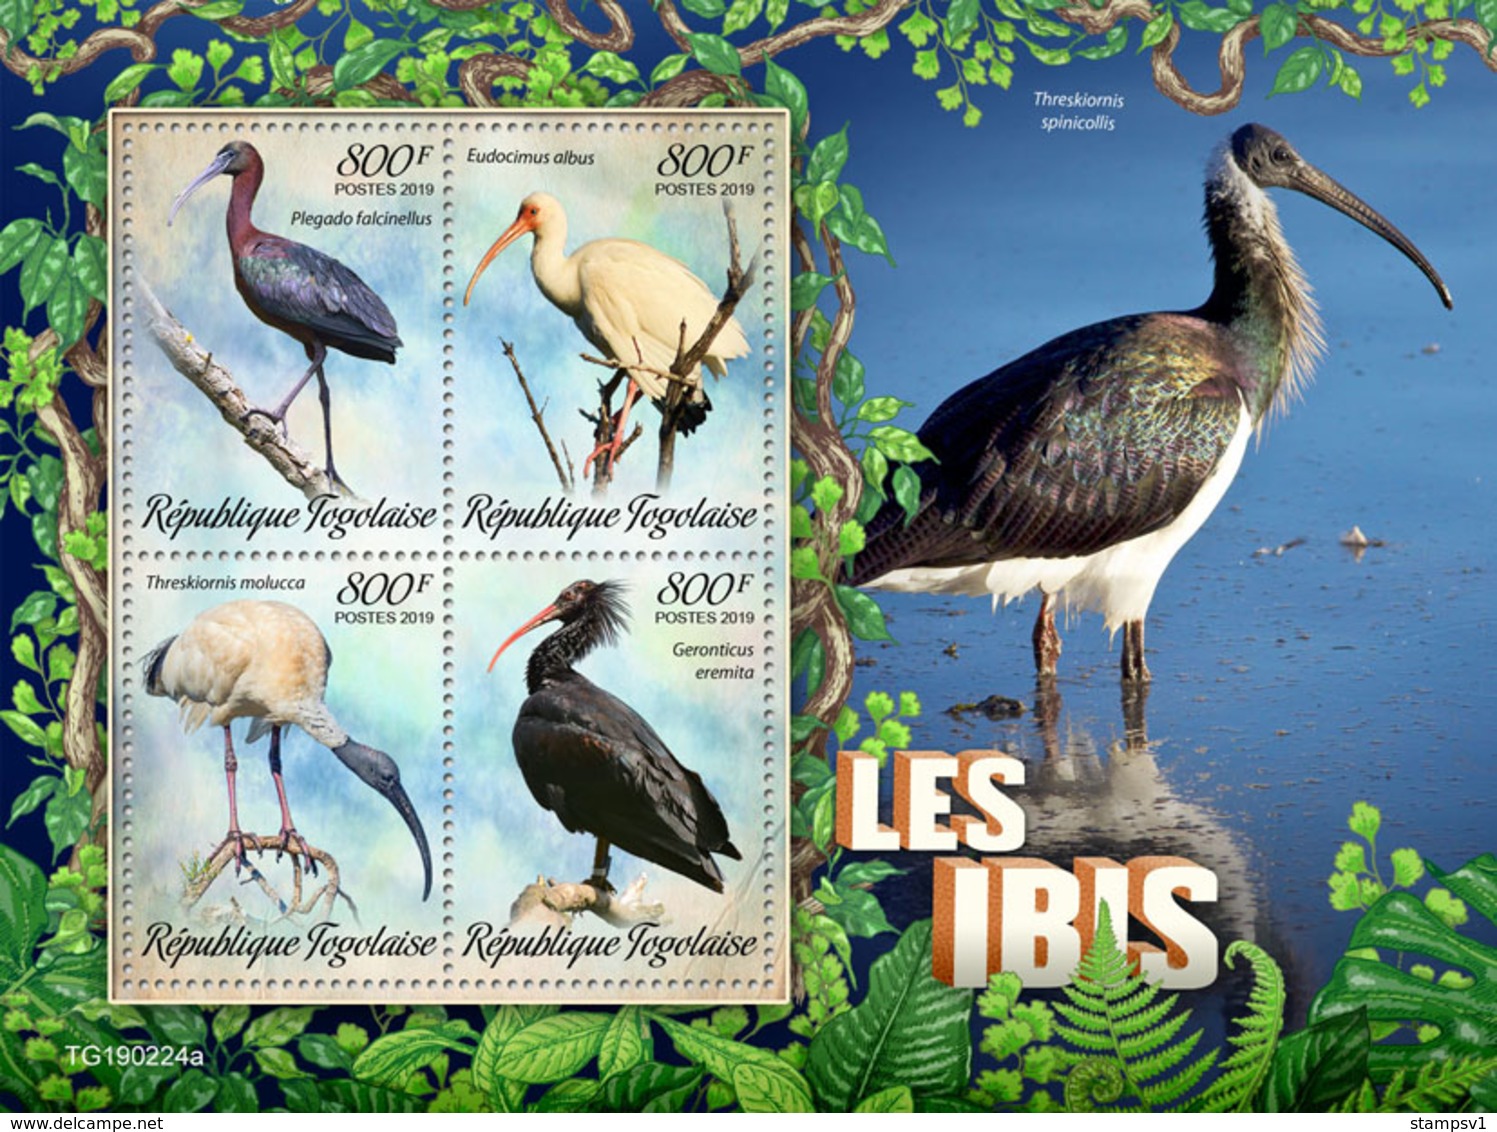 Togo.  2019  Ibis. (0224a)   OFFICIAL ISSUE - Cigognes & échassiers